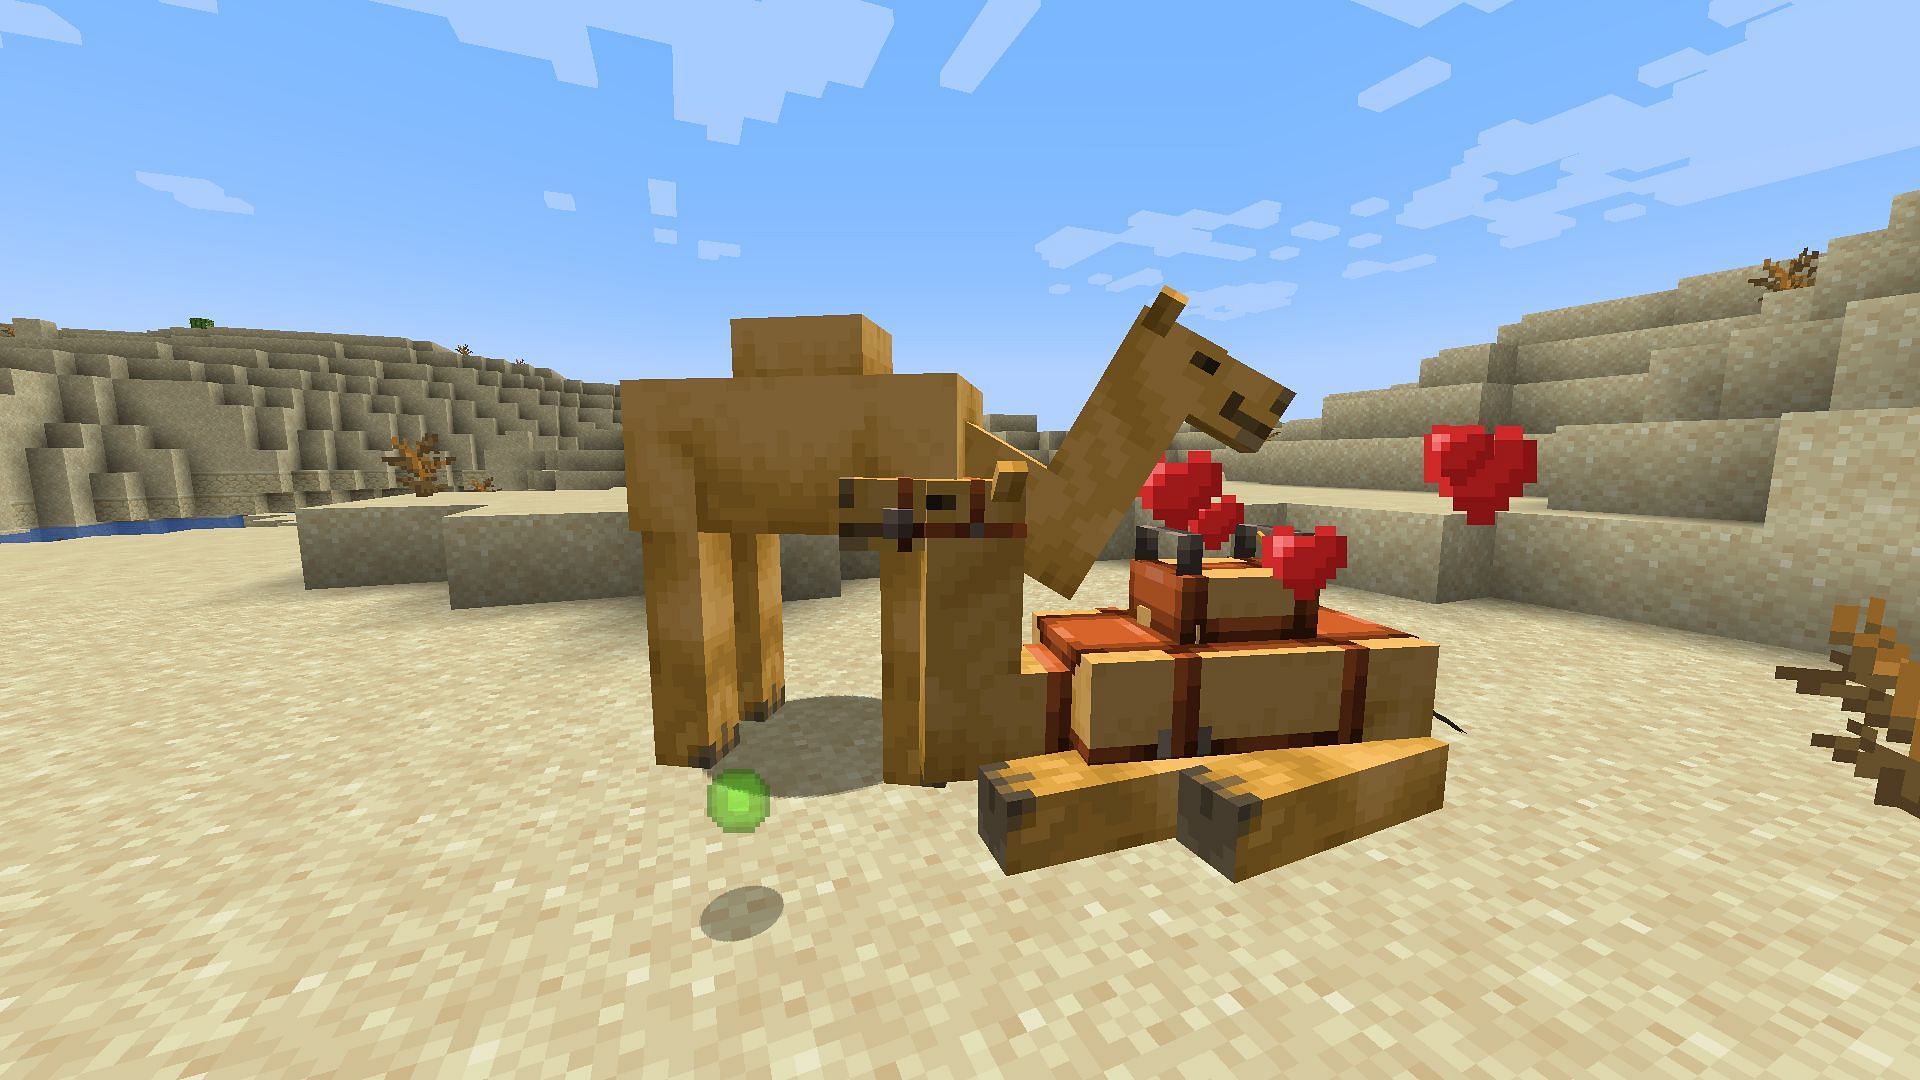 Camels are passive mobs that can be tamed and ridden in Minecraft 1.20 update (Image via Mojang)